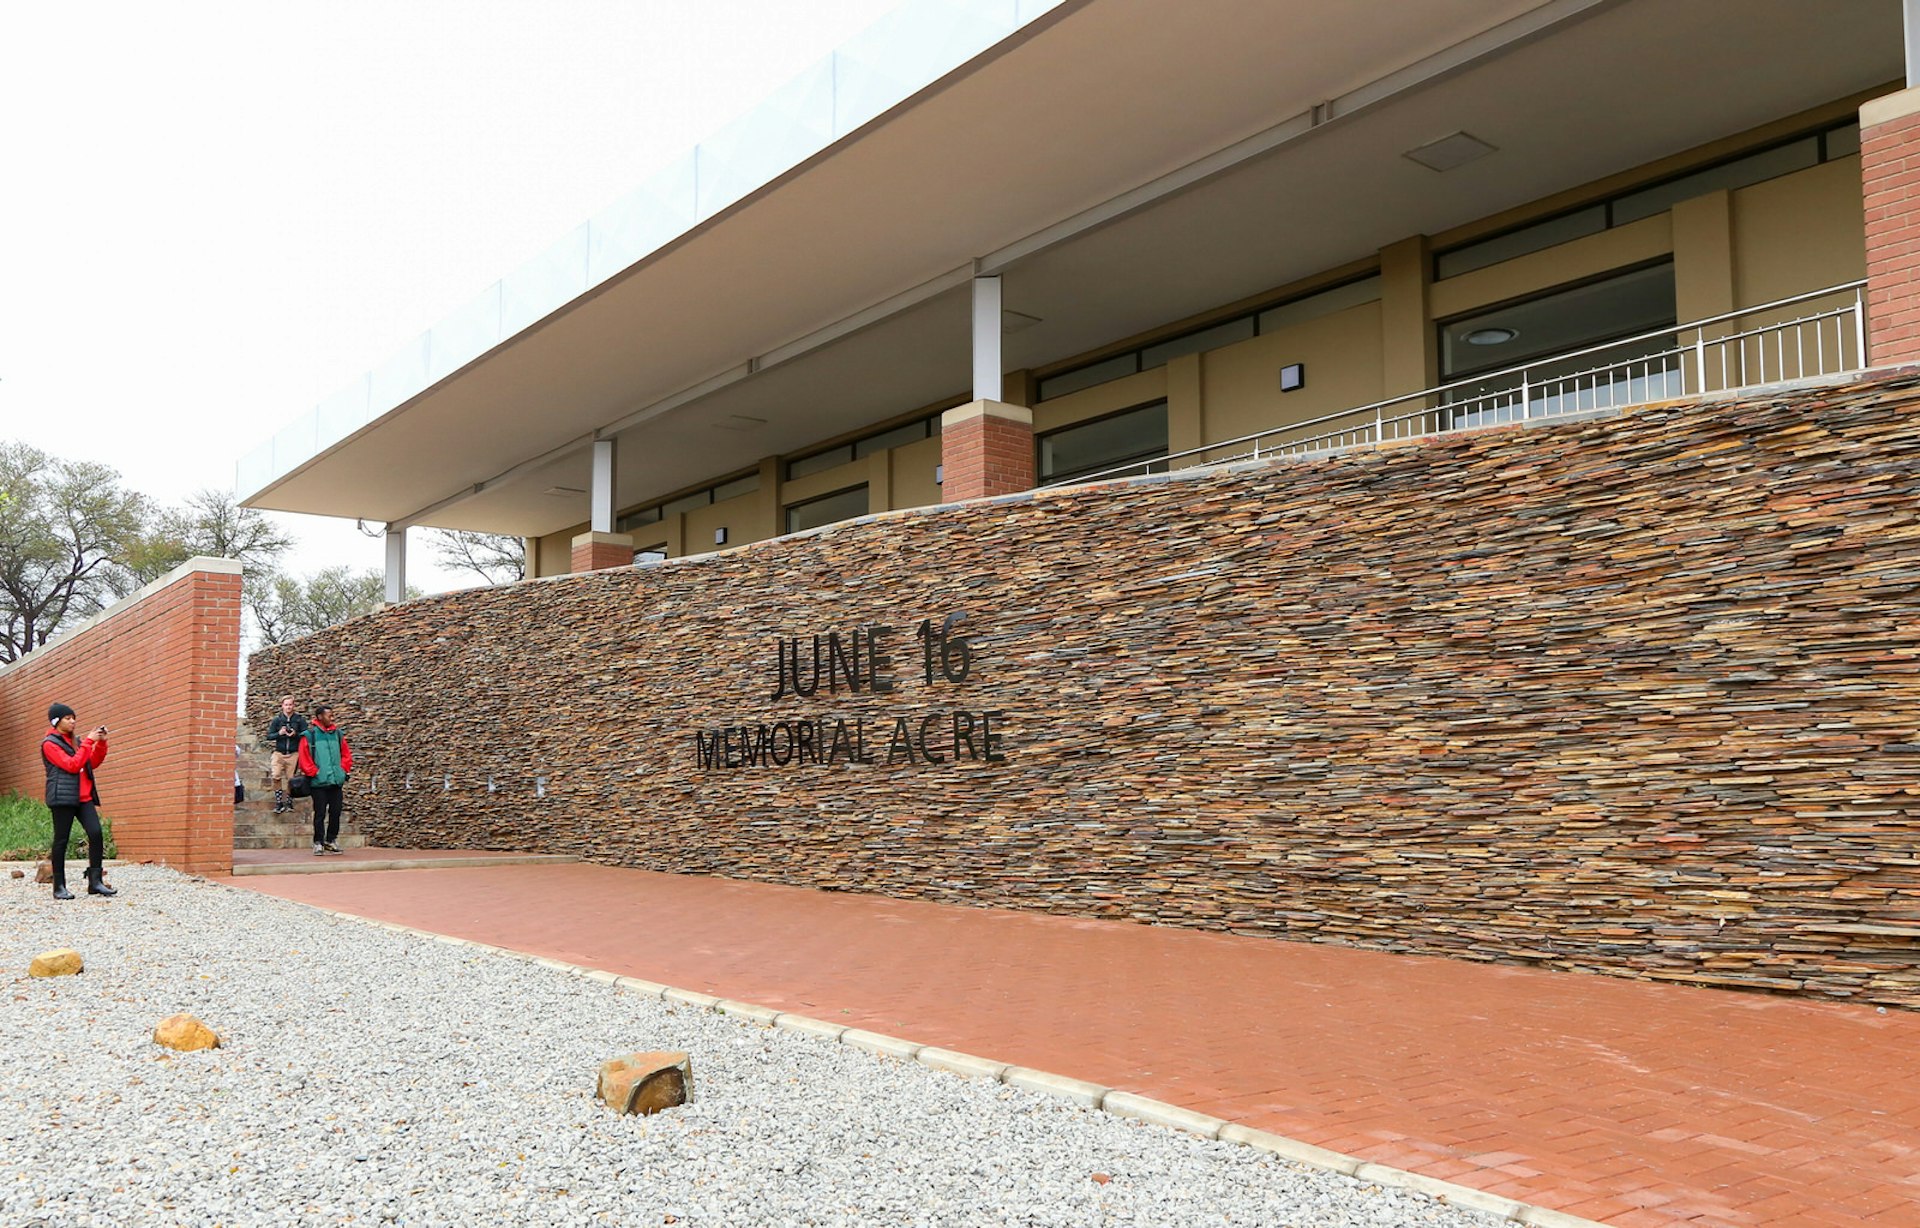 Johannesburg June - A brick walkway passes beneath a stone wall with raised black letters spelling June 16 Memorial Acre; a building stands behind